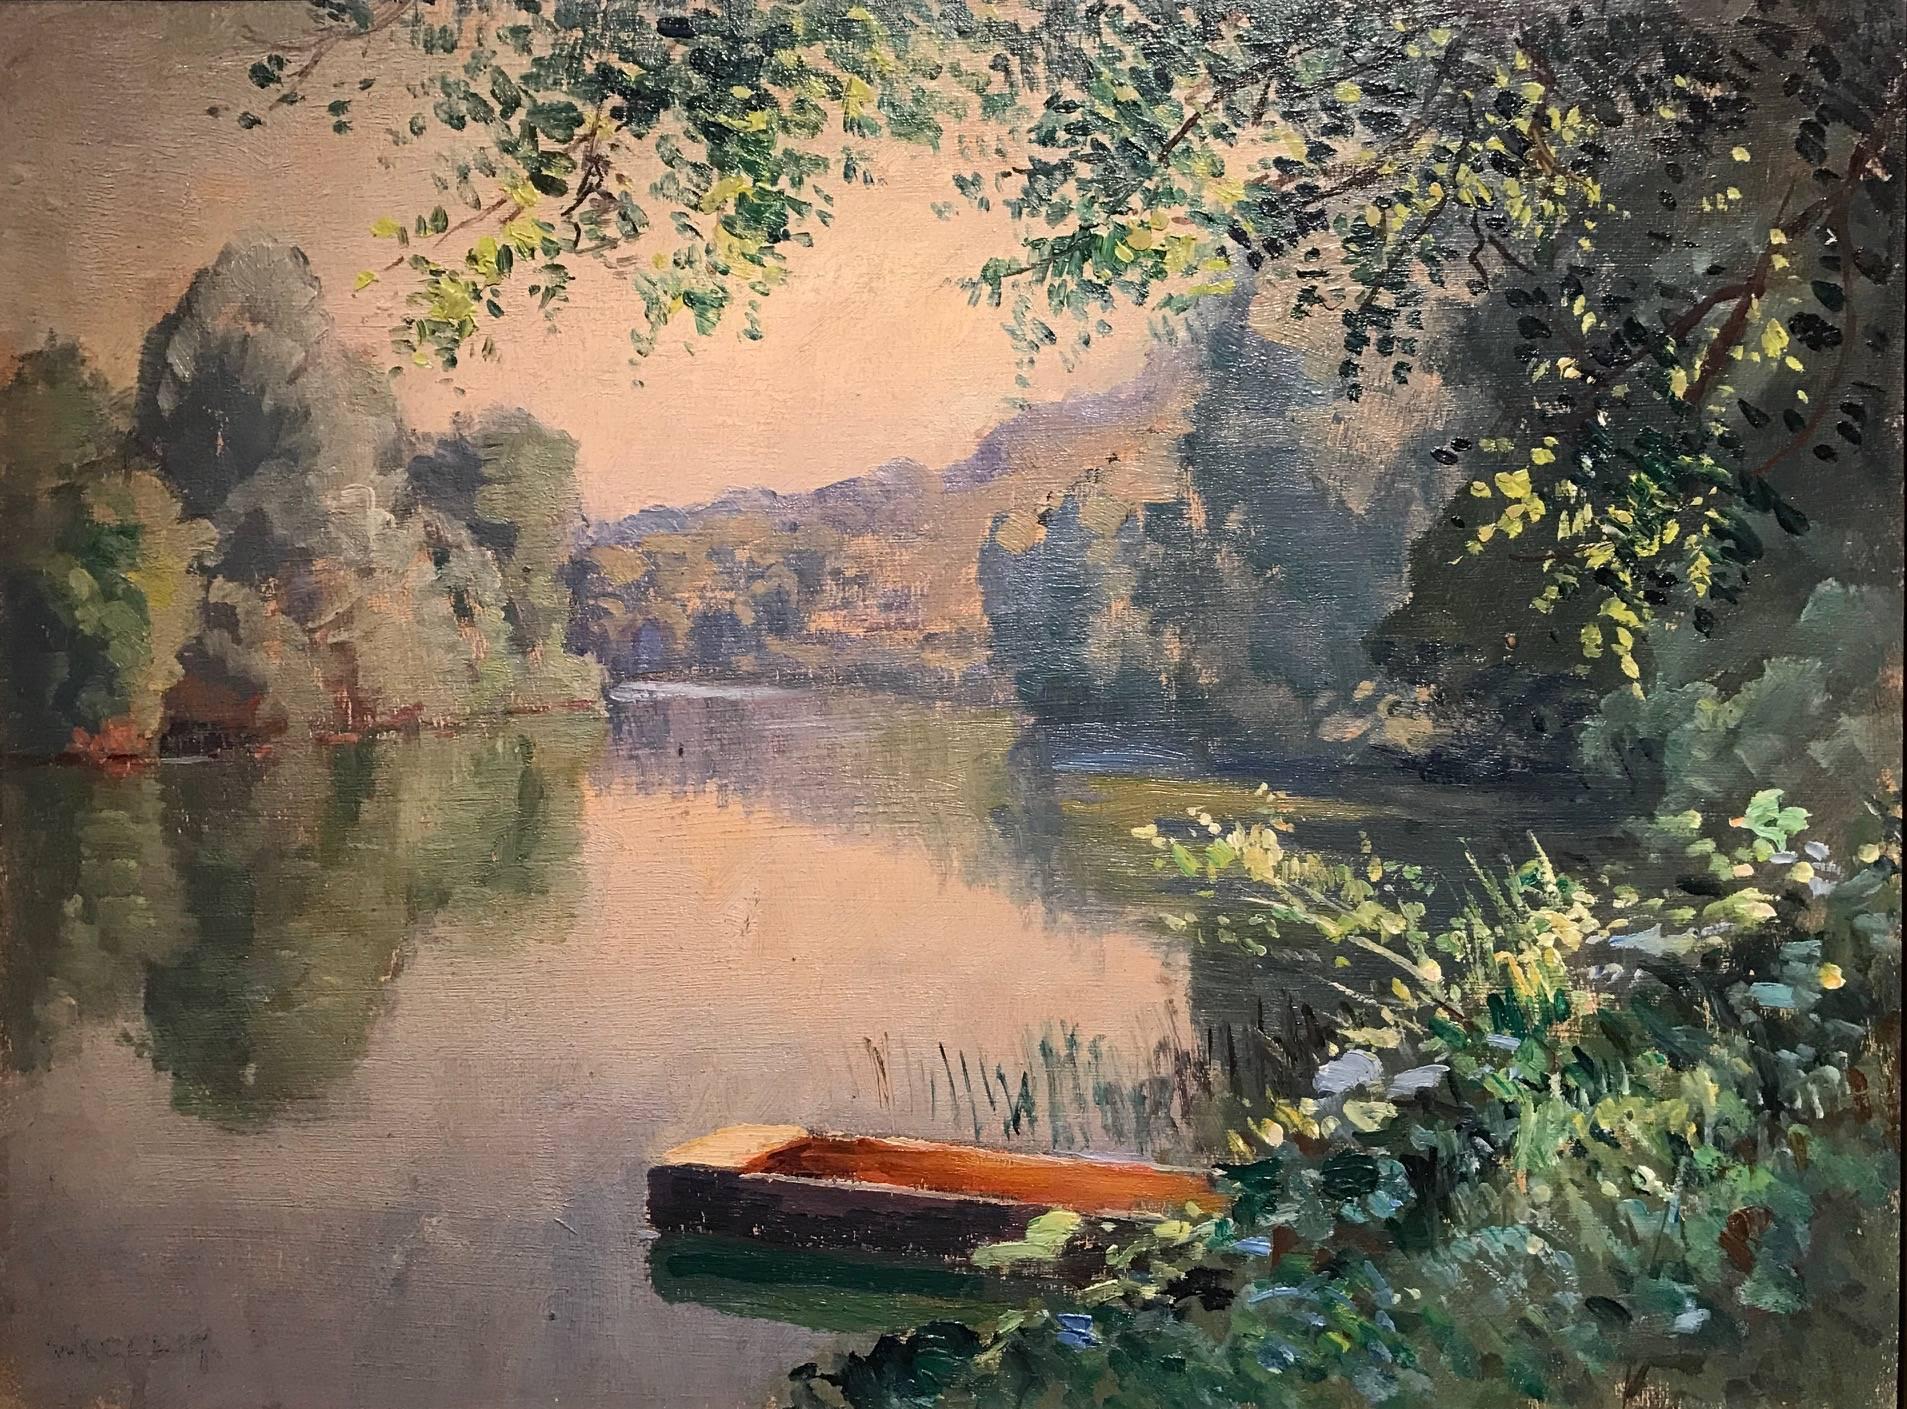 Emile Wegelin Landscape Painting - Original French Impressionist Signed Oil Painting Tranquil River Scene & Boat